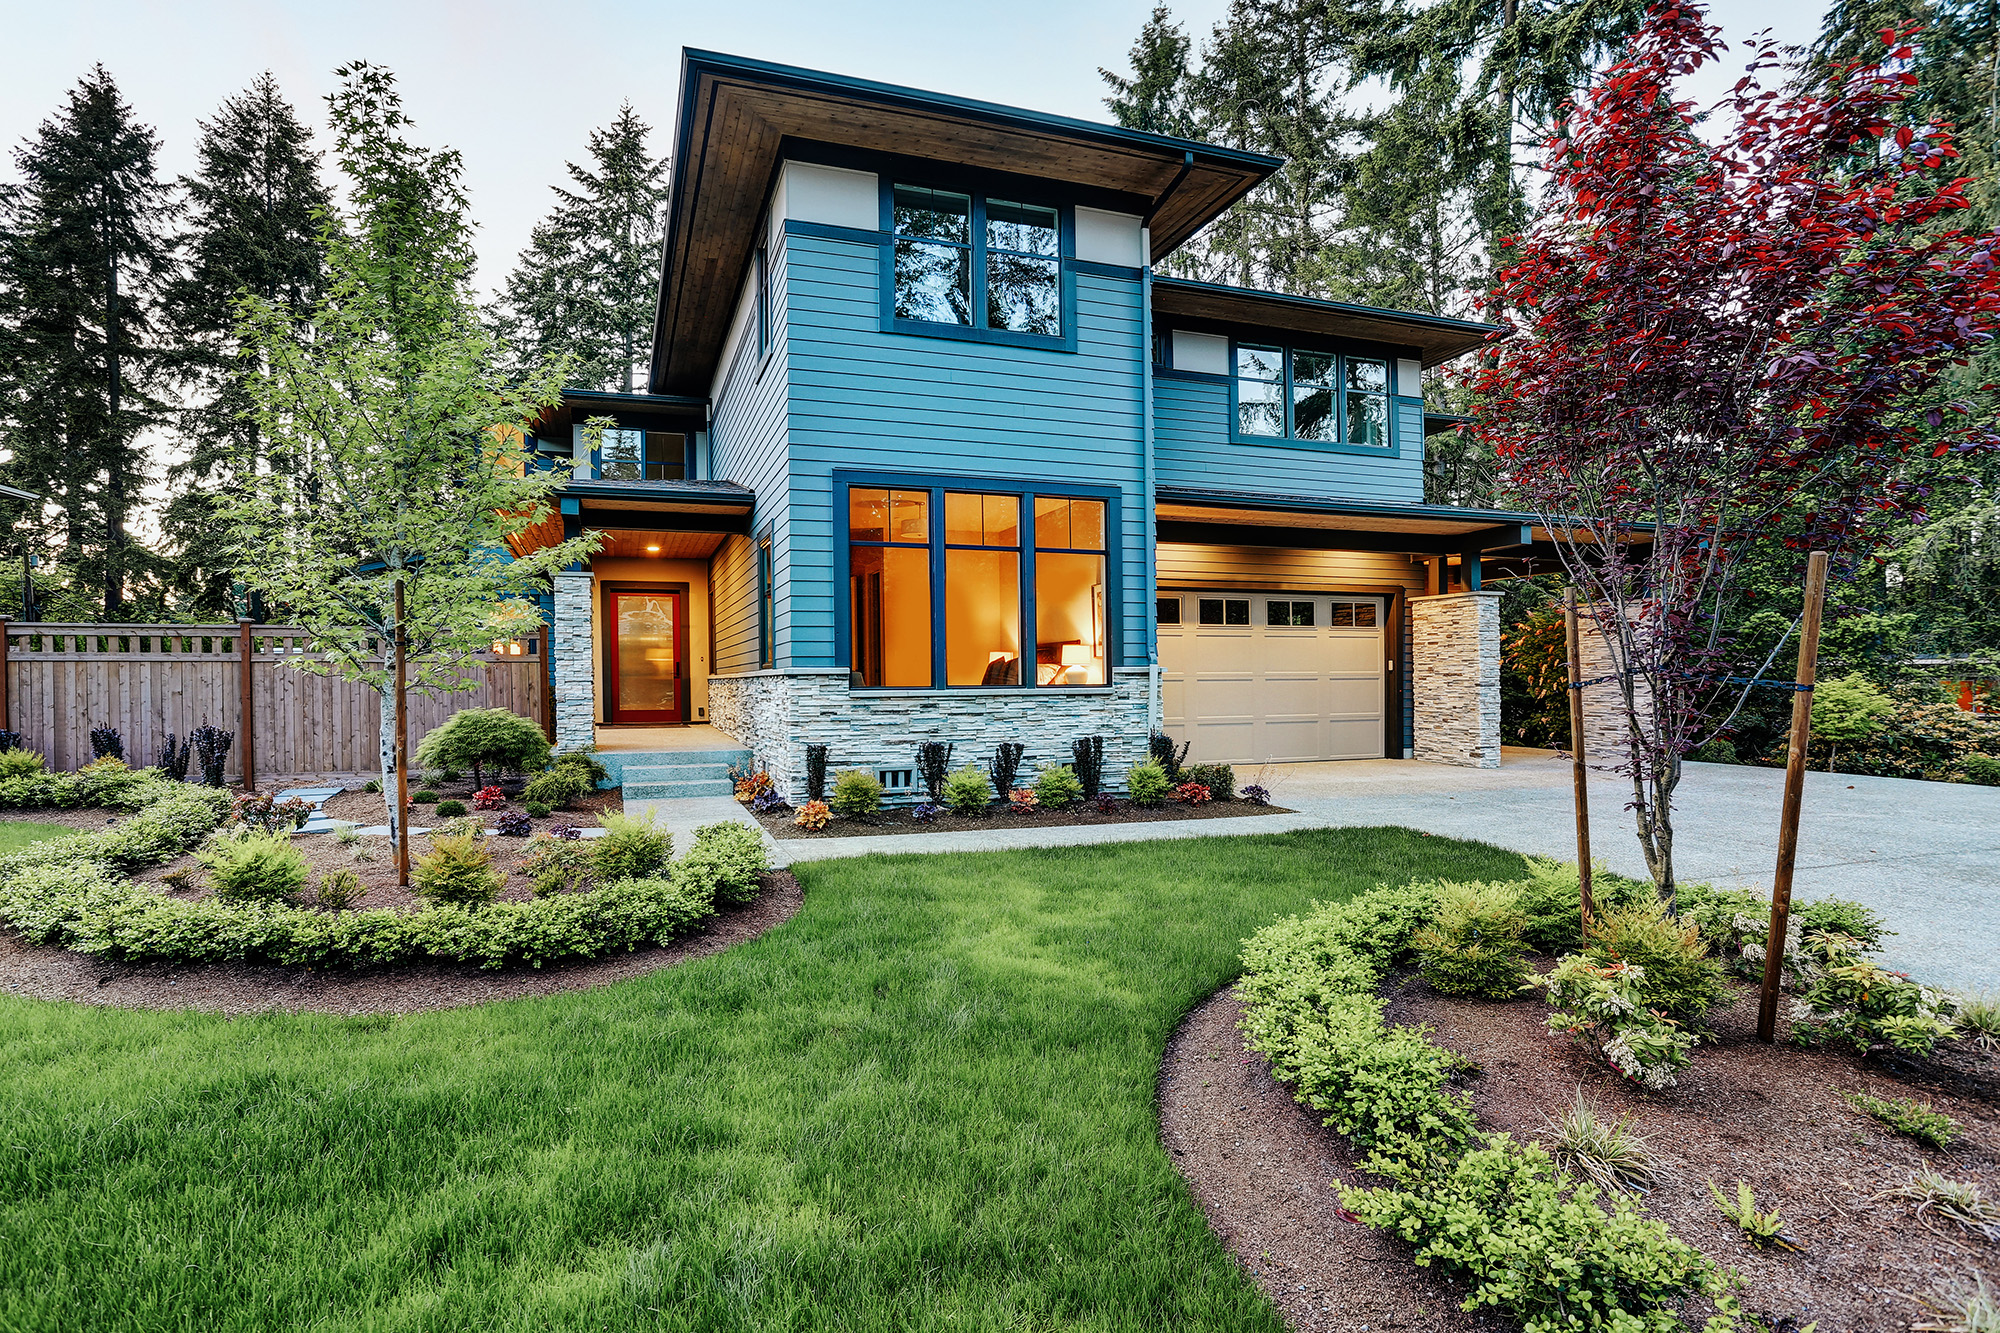 Luxurious Home Design With Modern Curb Appeal In Bellevue.